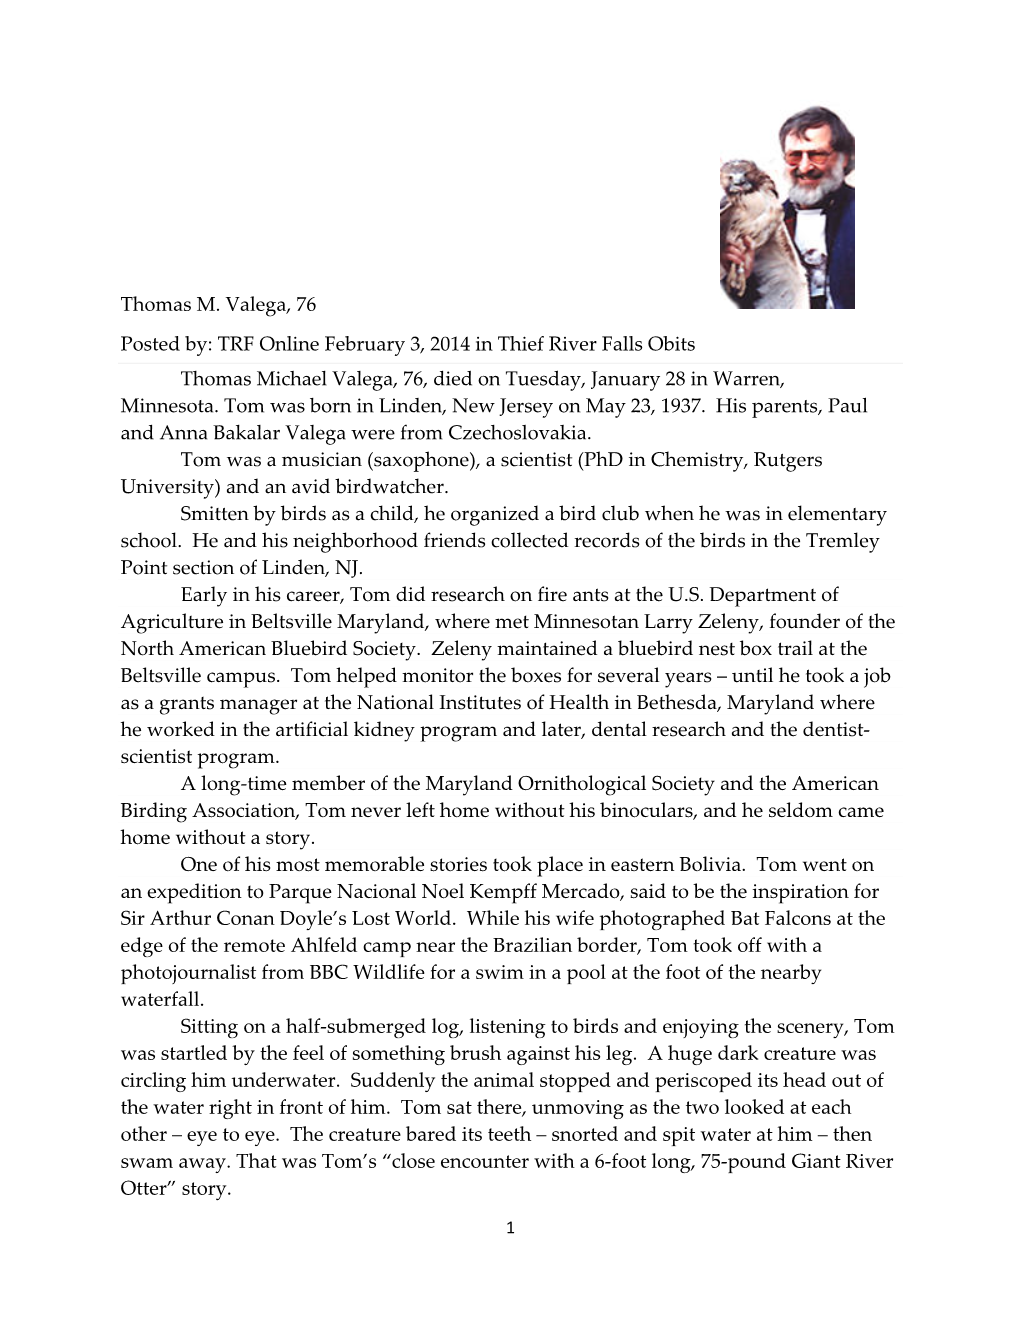 Thomas M. Valega, 76 Posted By: TRF Online February 3, 2014 in Thief River Falls Obits Thomas Michael Valega, 76, Died on Tuesday, January 28 in Warren, Minnesota